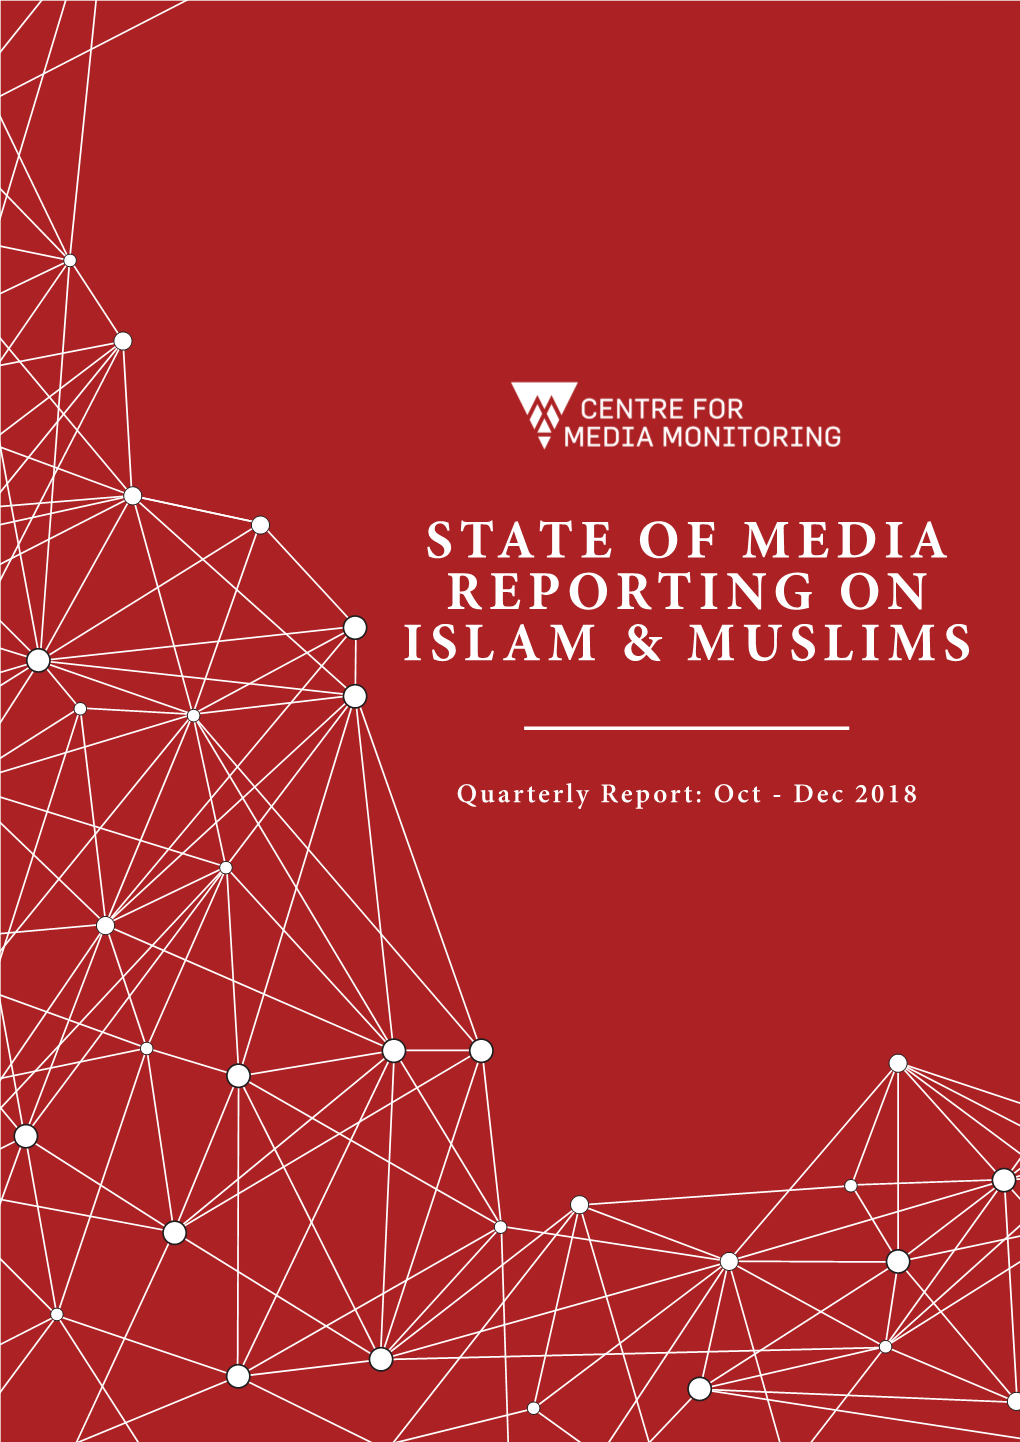 State of Media Reporting on Islam & Muslims